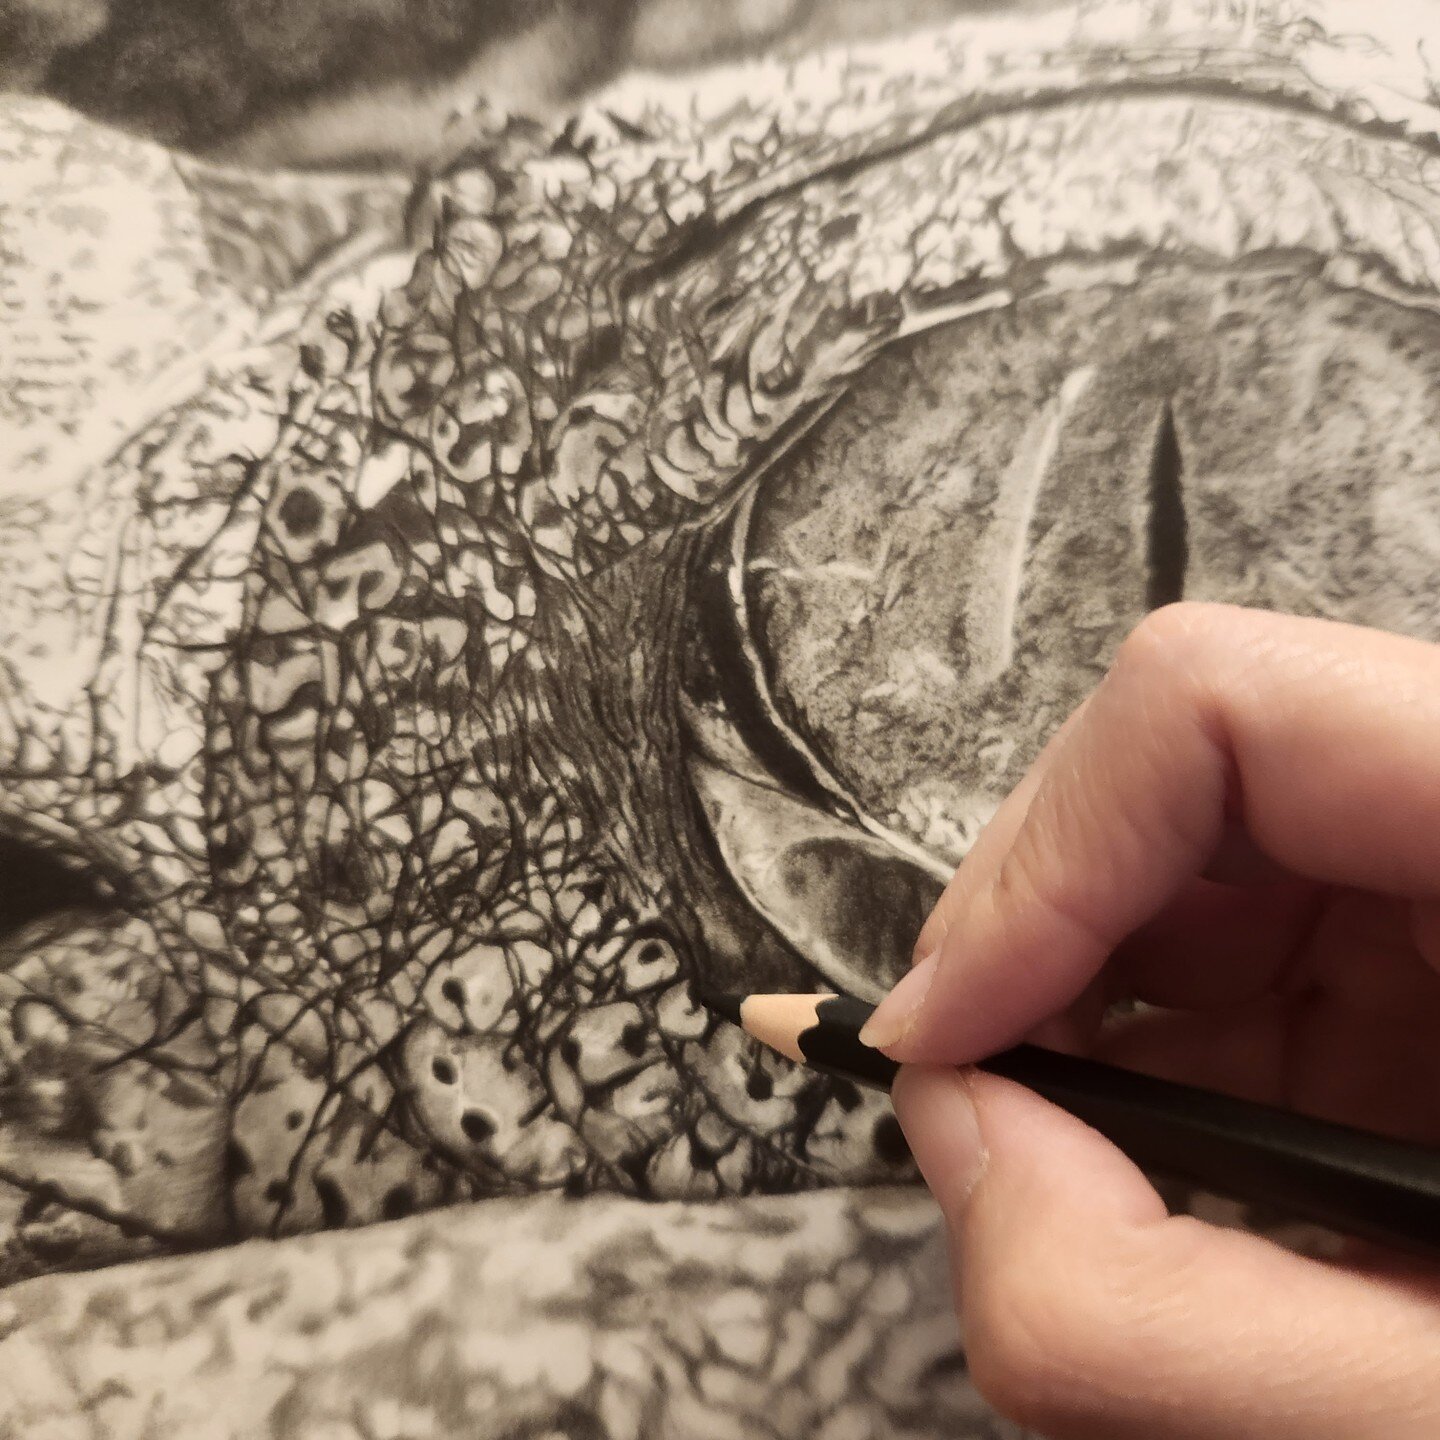 Details around the alligator's eye are very interesting. Loving working on each scales! To achieve deeper darker tones, I used Faber Castell Pitt Matt pencils that has reduced shiny effect that we normally get from normal graphite pencils! The combin